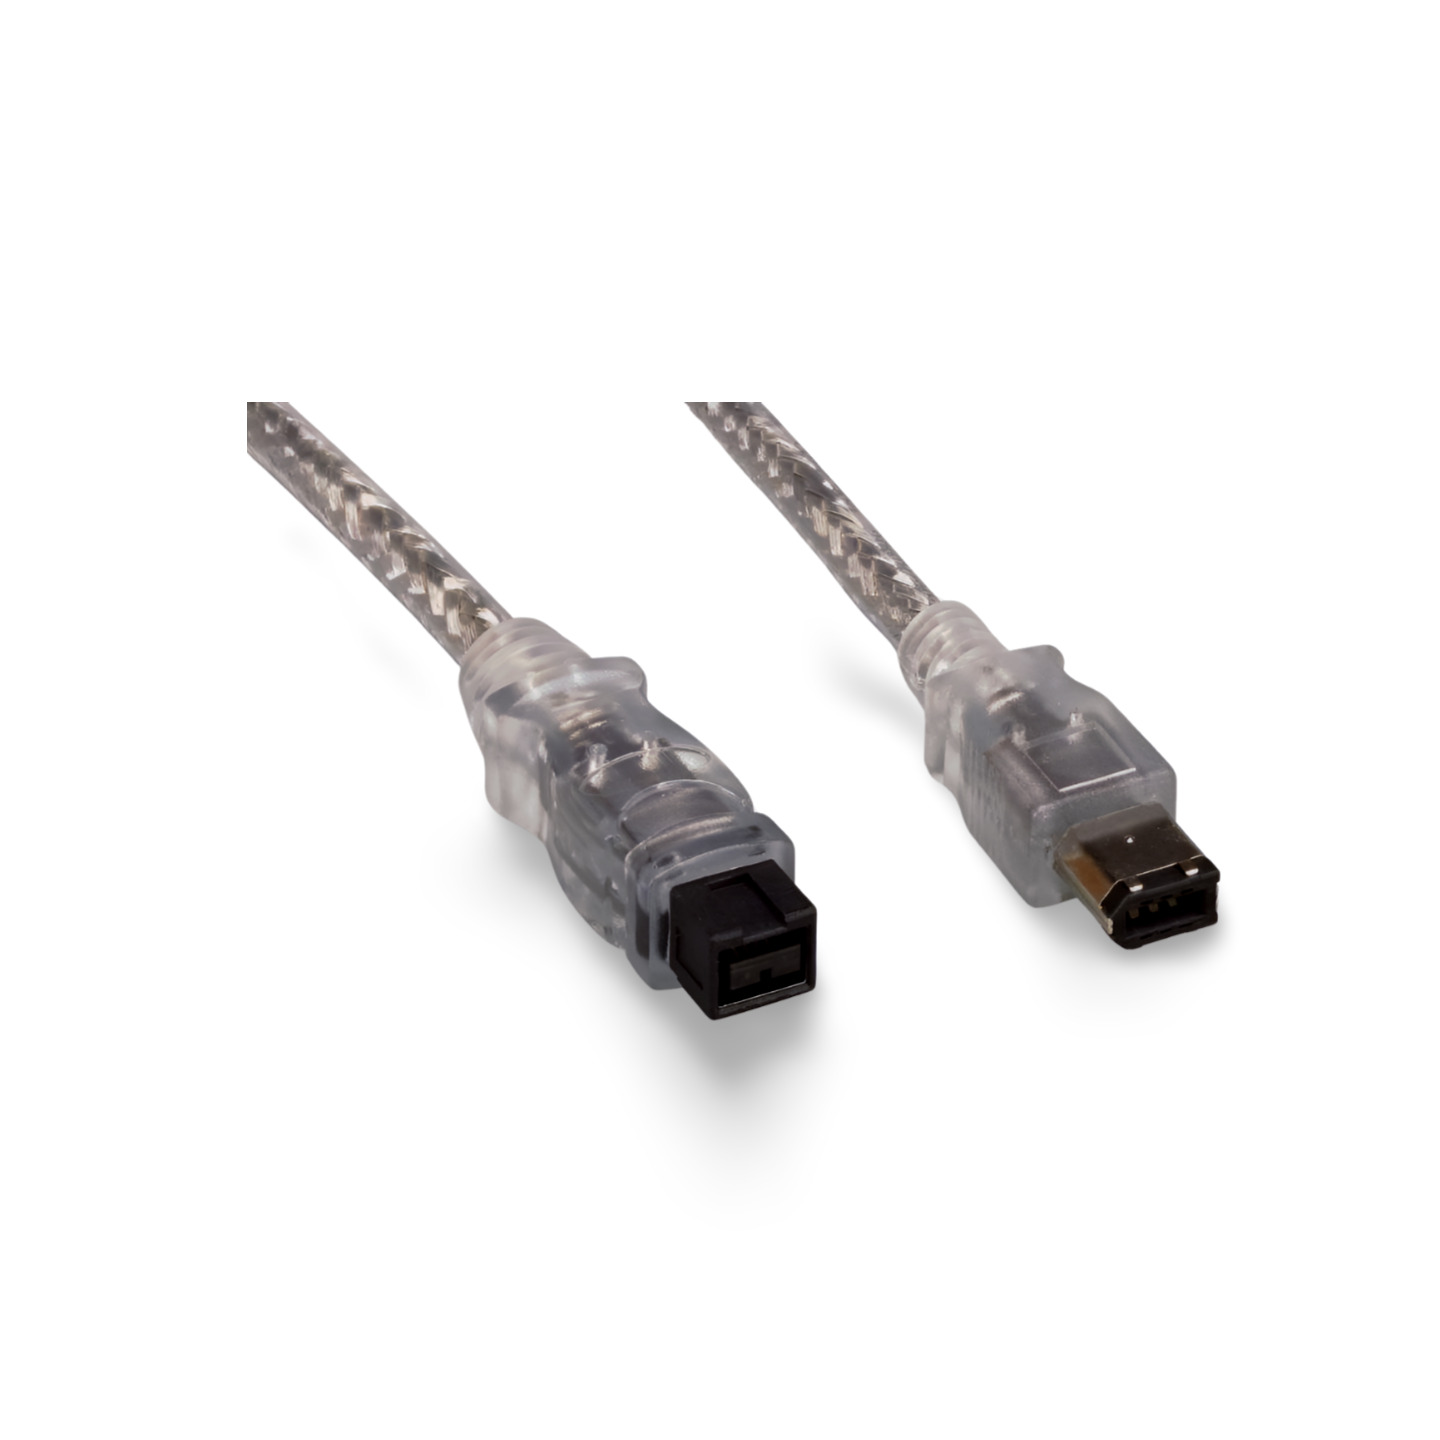 6ft FireWire 1394b Bilingual Cable 9 Pin to 6 Pin - Silver